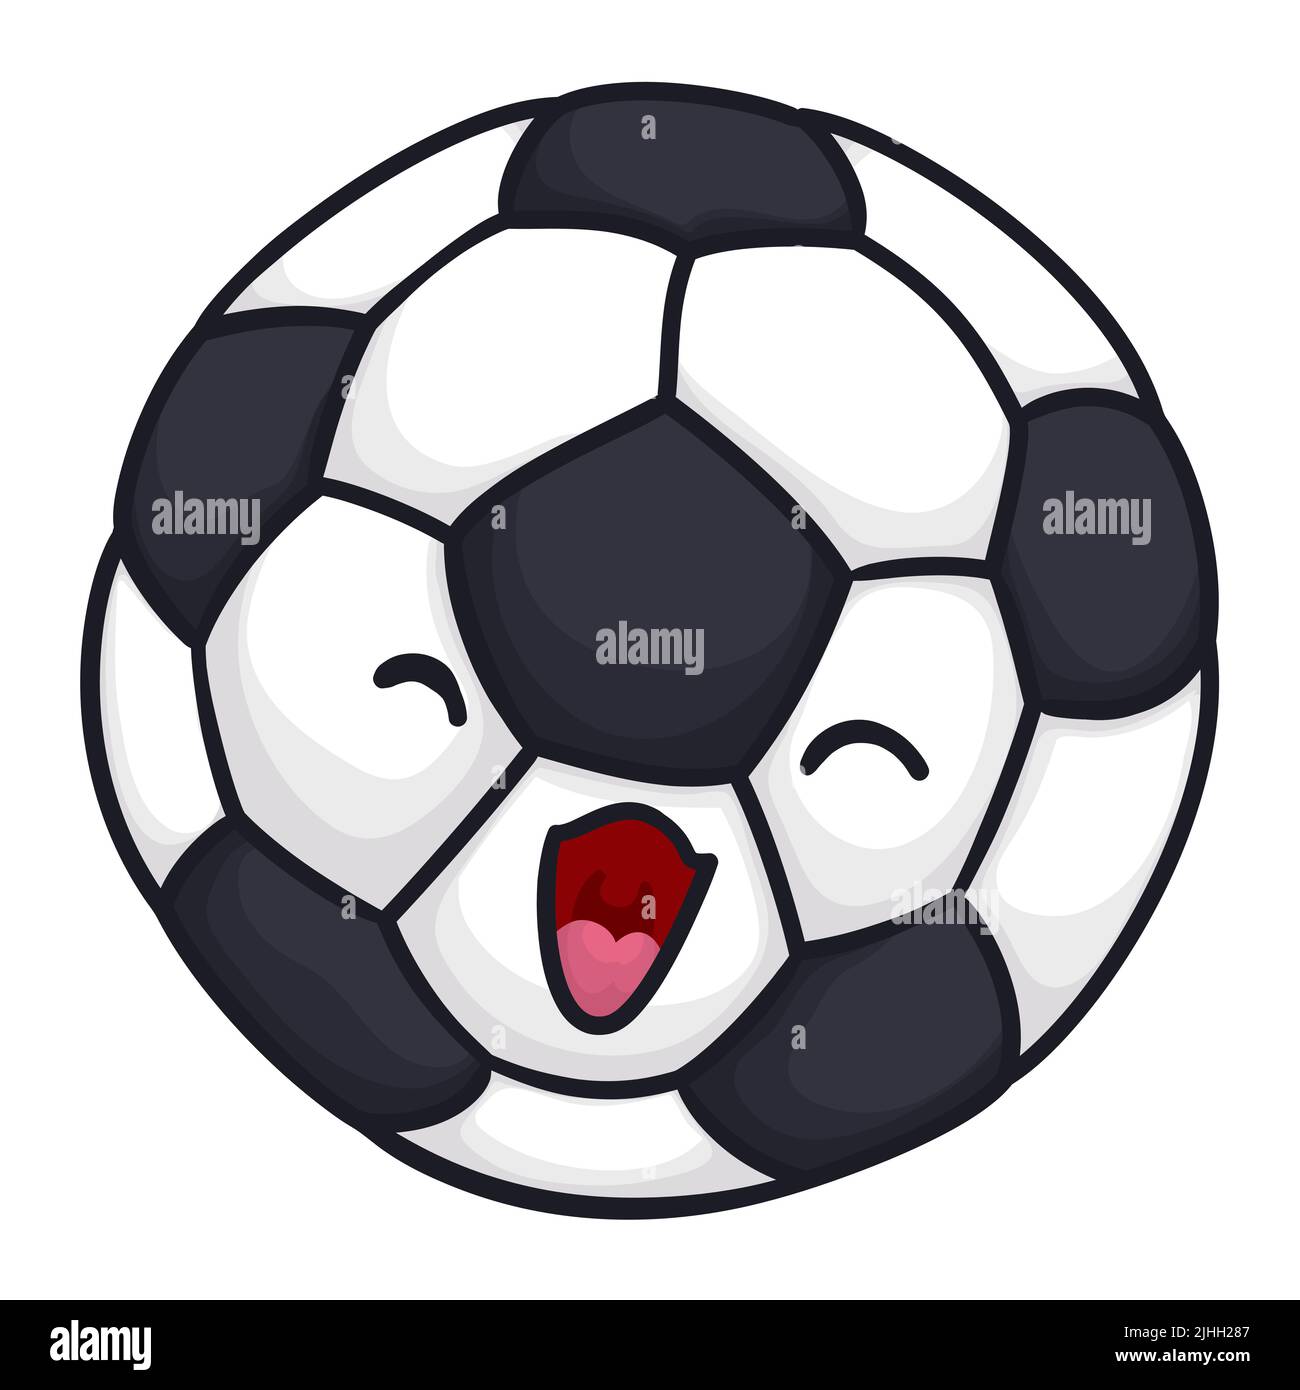 Cute and super happy soccer ball, celebrating the upcoming sports match. Design in cartoon style over white background. Stock Vector